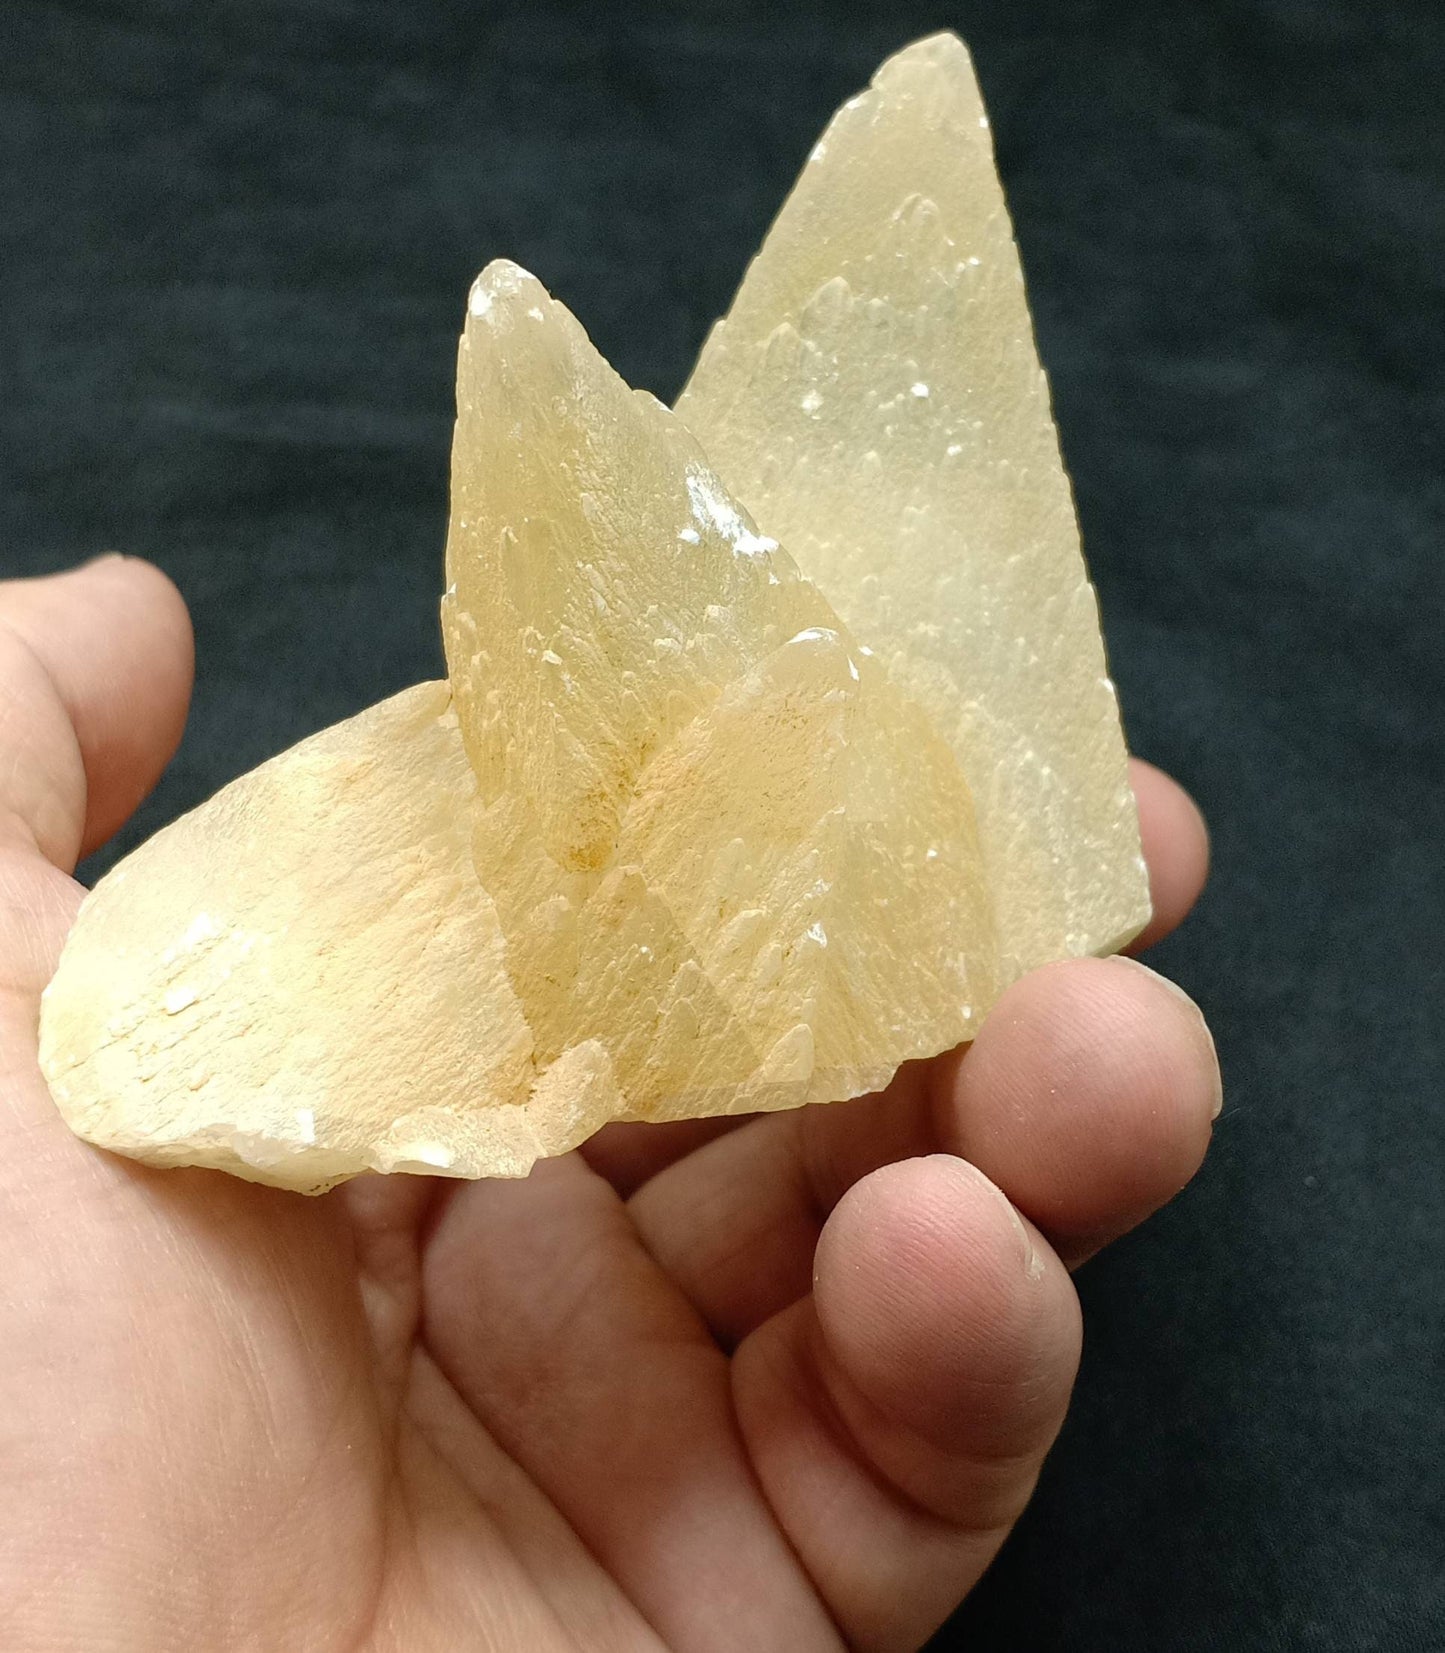 Dogteeth calcite crystals cluster with beautiful terminations 218 grams